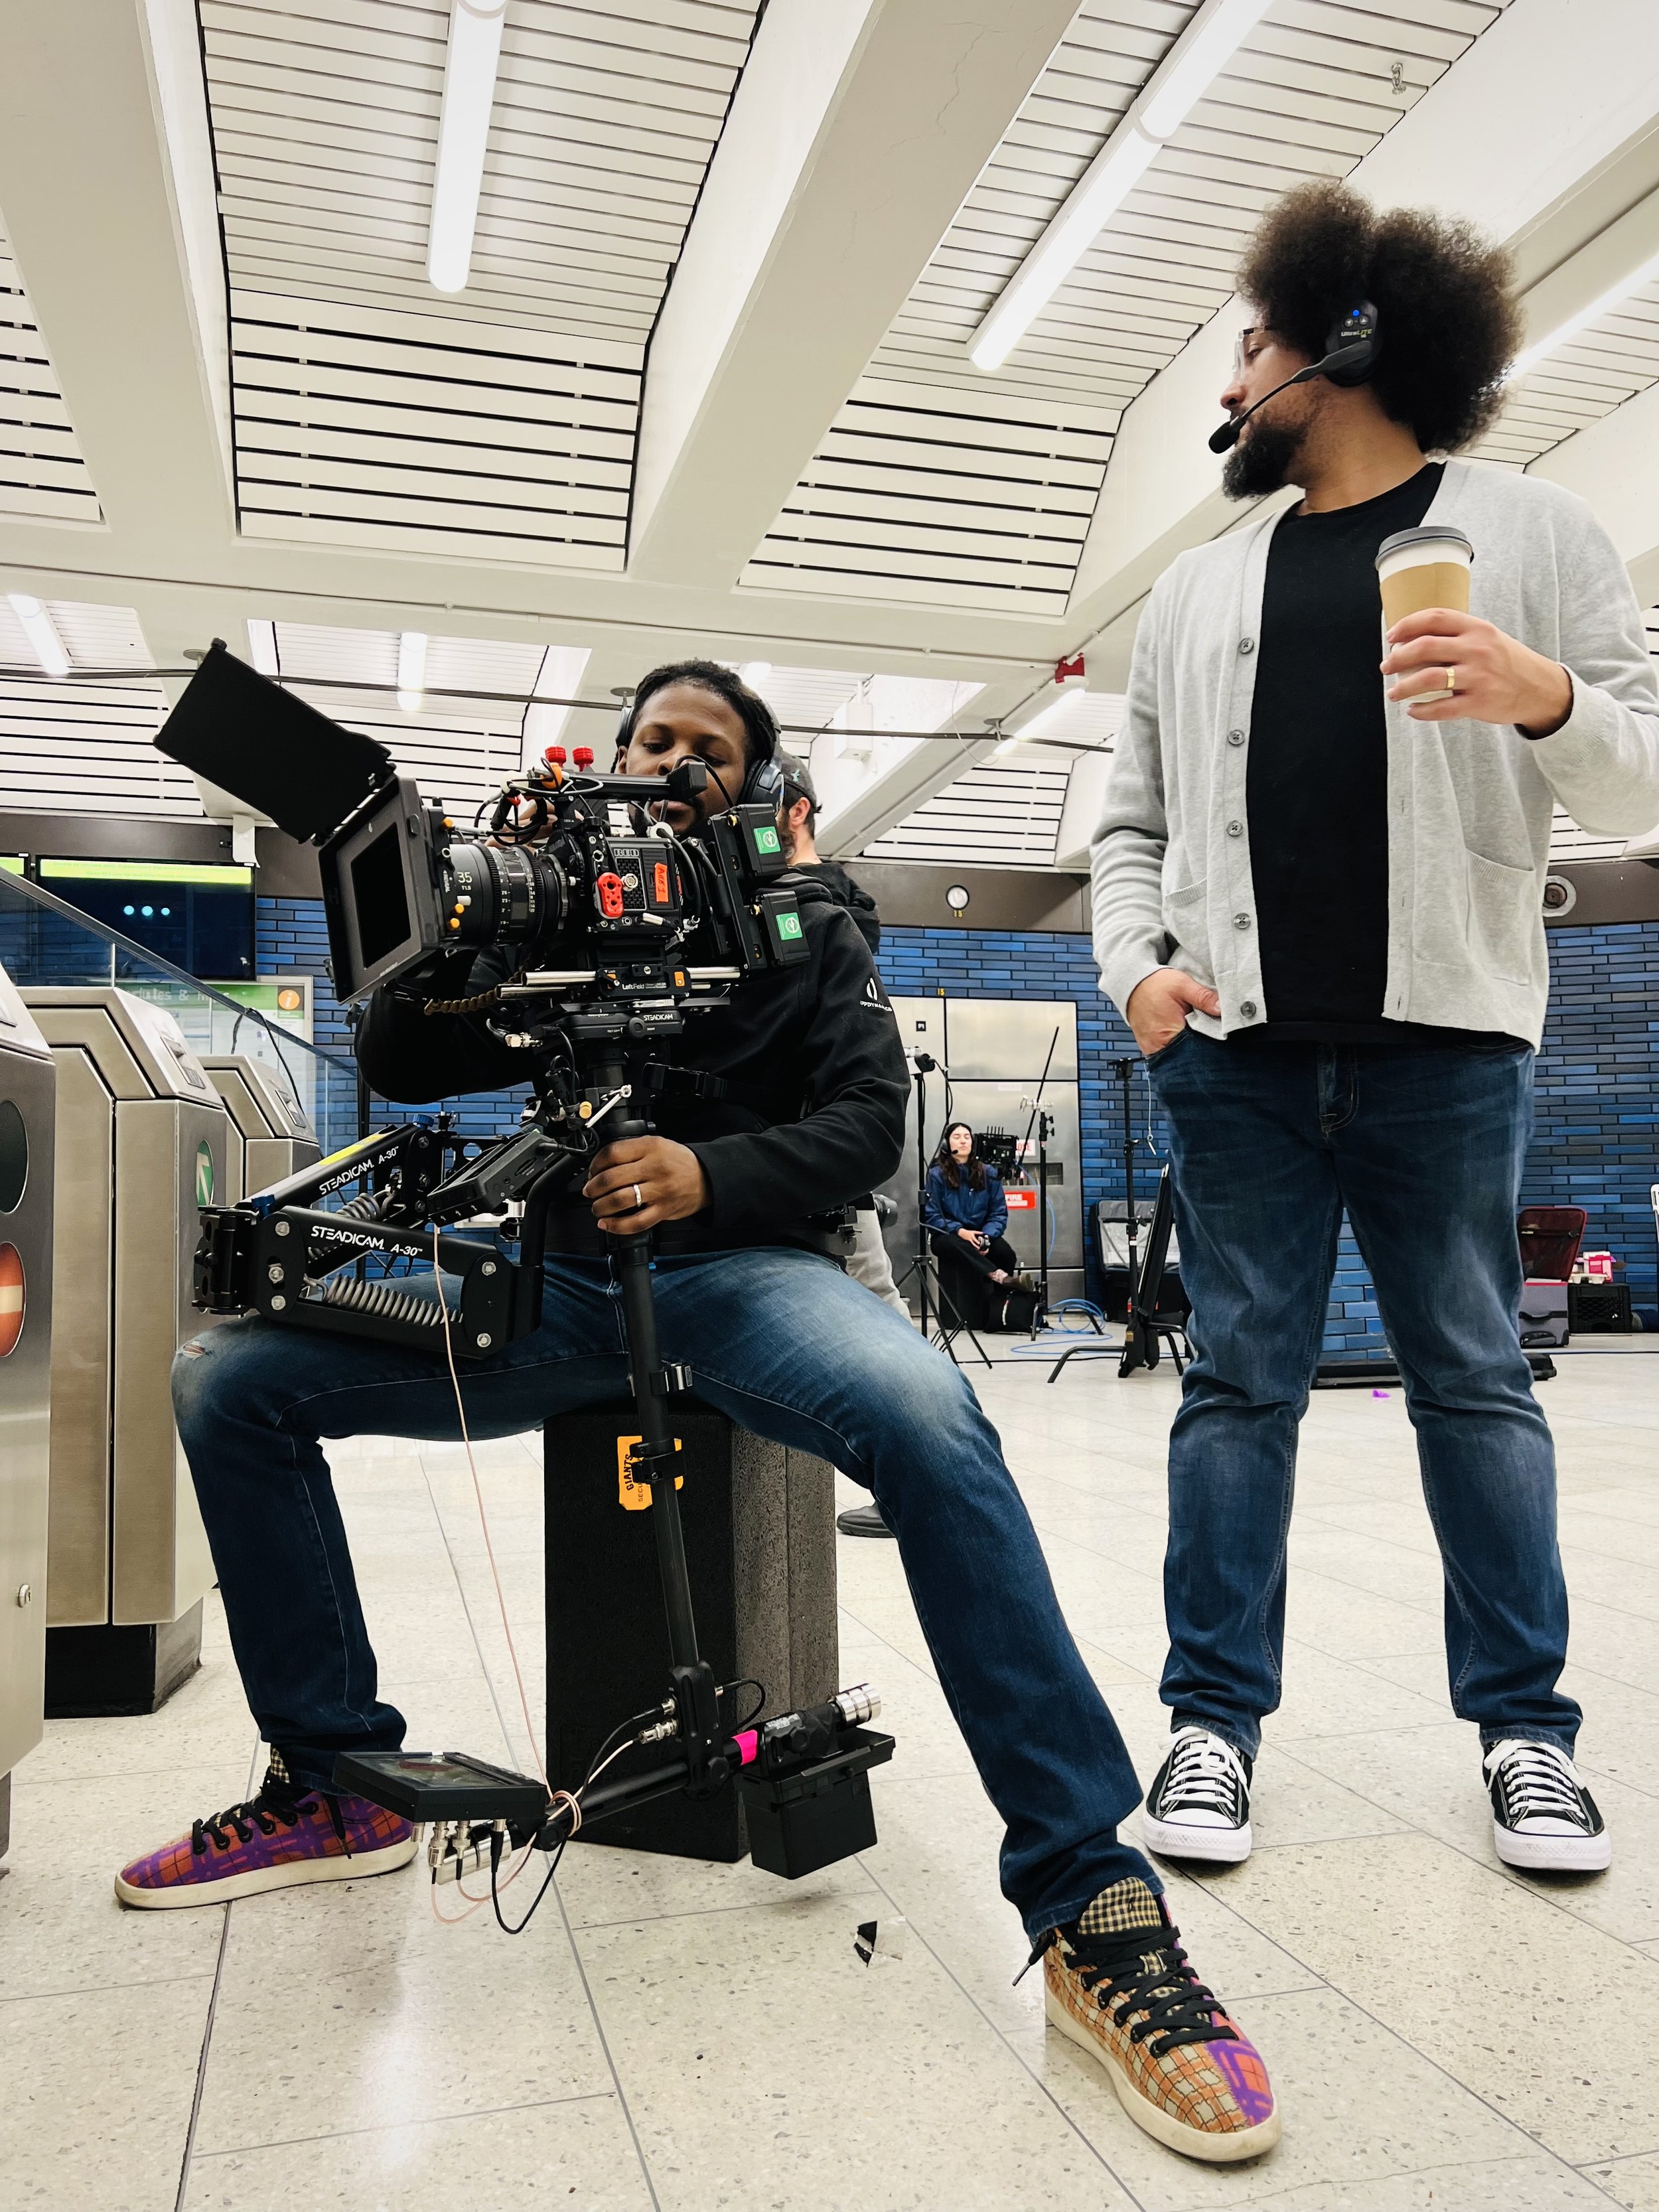  Alex with Stedi-Cam Operator Stephan Knight on an Clipper/Apple Commercial 